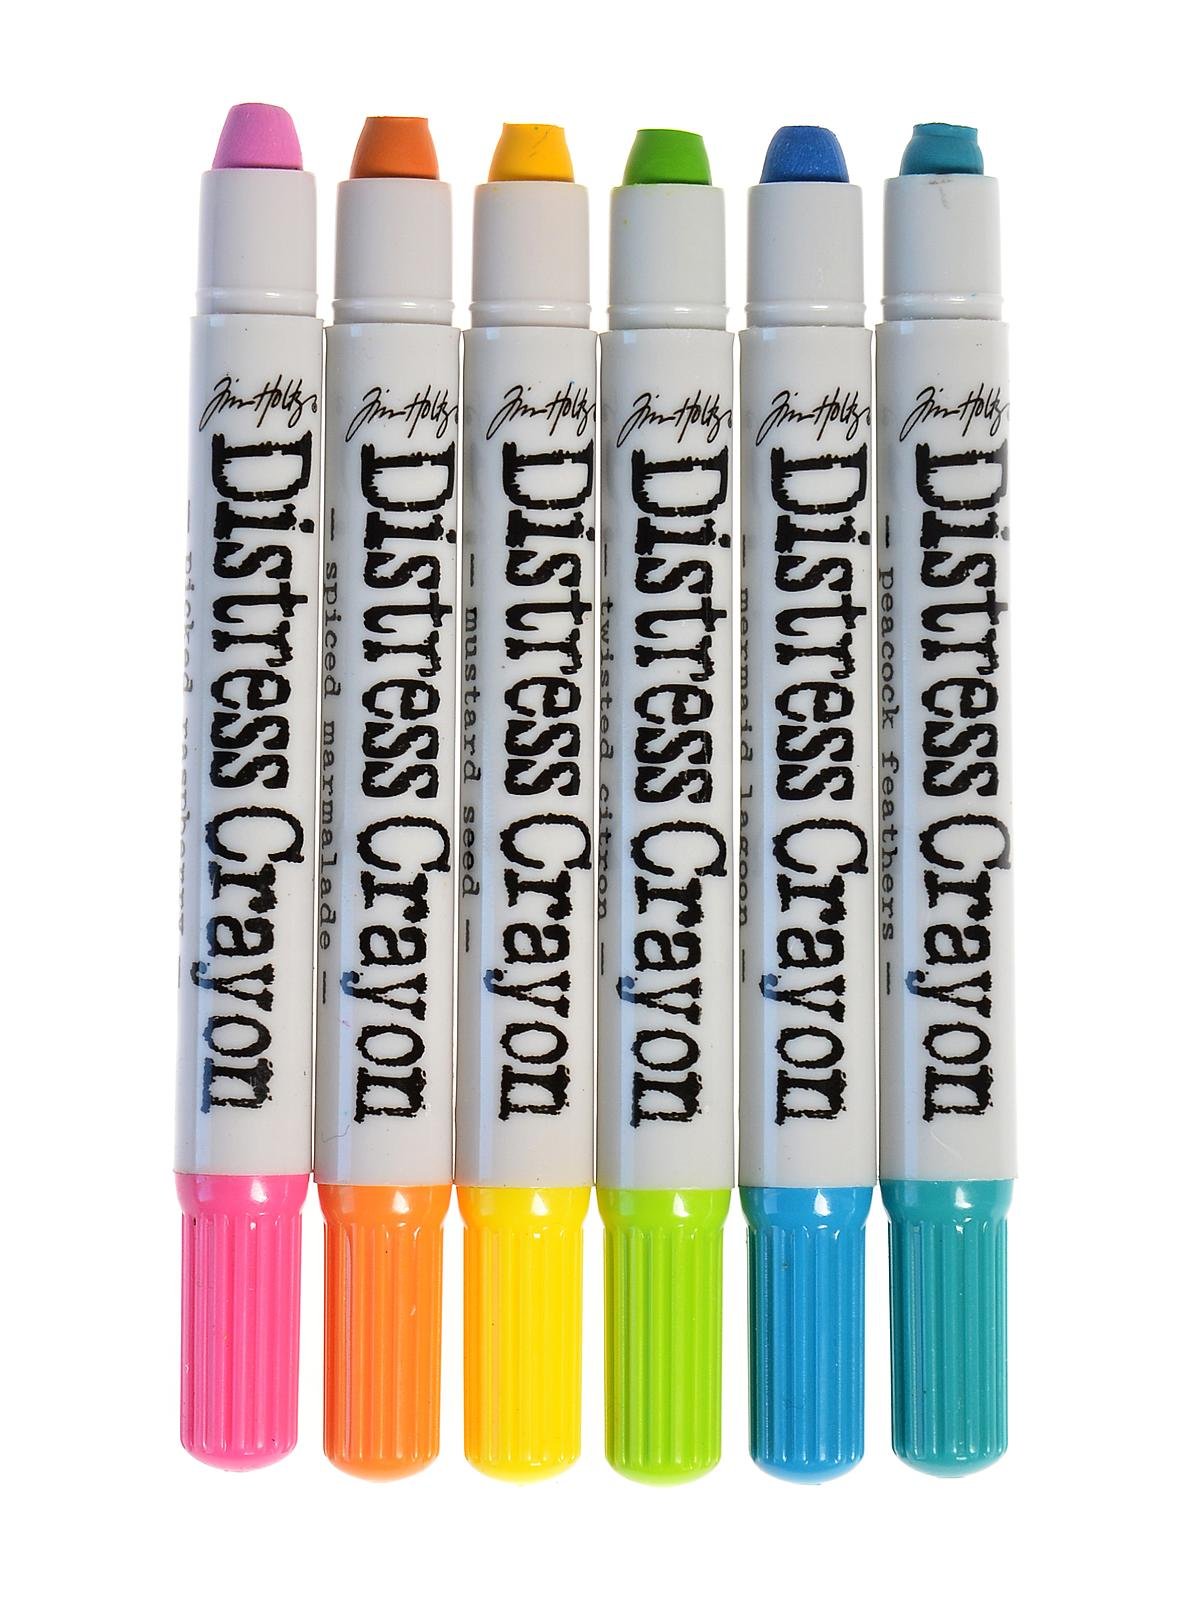 Tim Holtz Distress Crayons, 14 Crayons of Different Colors #2